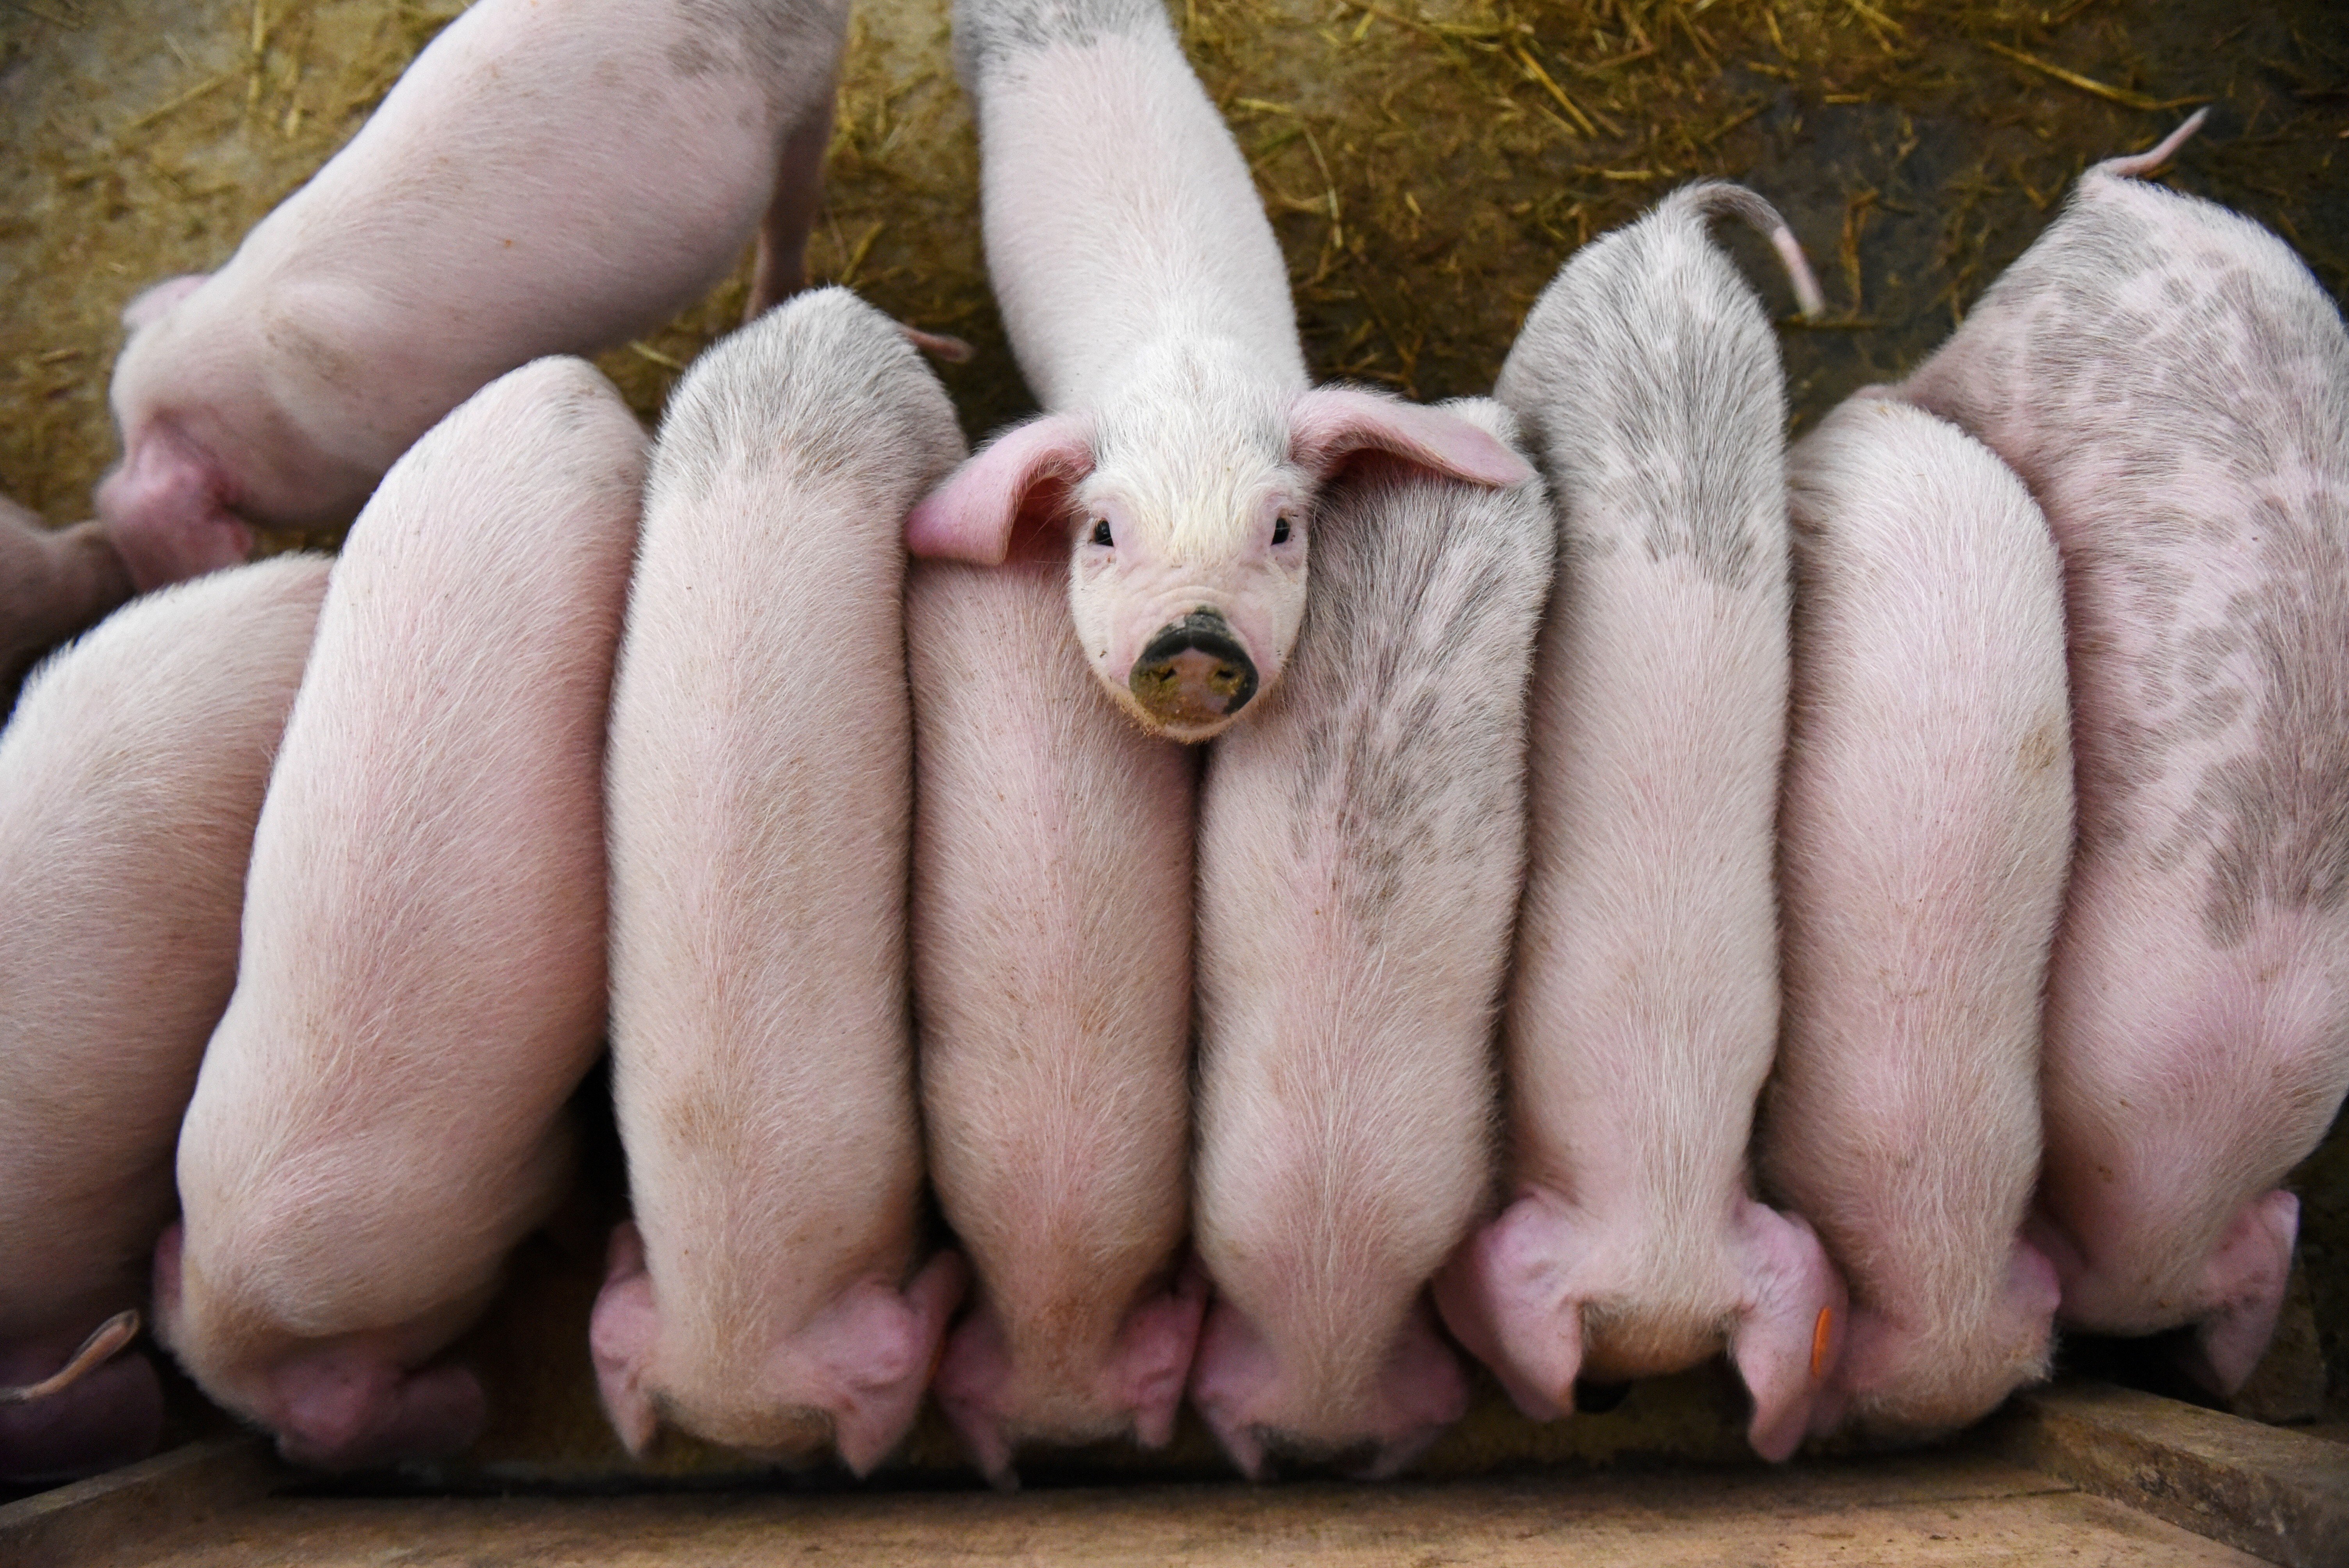 African swine fever first appeared in China in 2018, creating a severe shortage of the staple meat in the world’s largest pork consuming country, resulting in skyrocketing food prices. Photo: Reuters